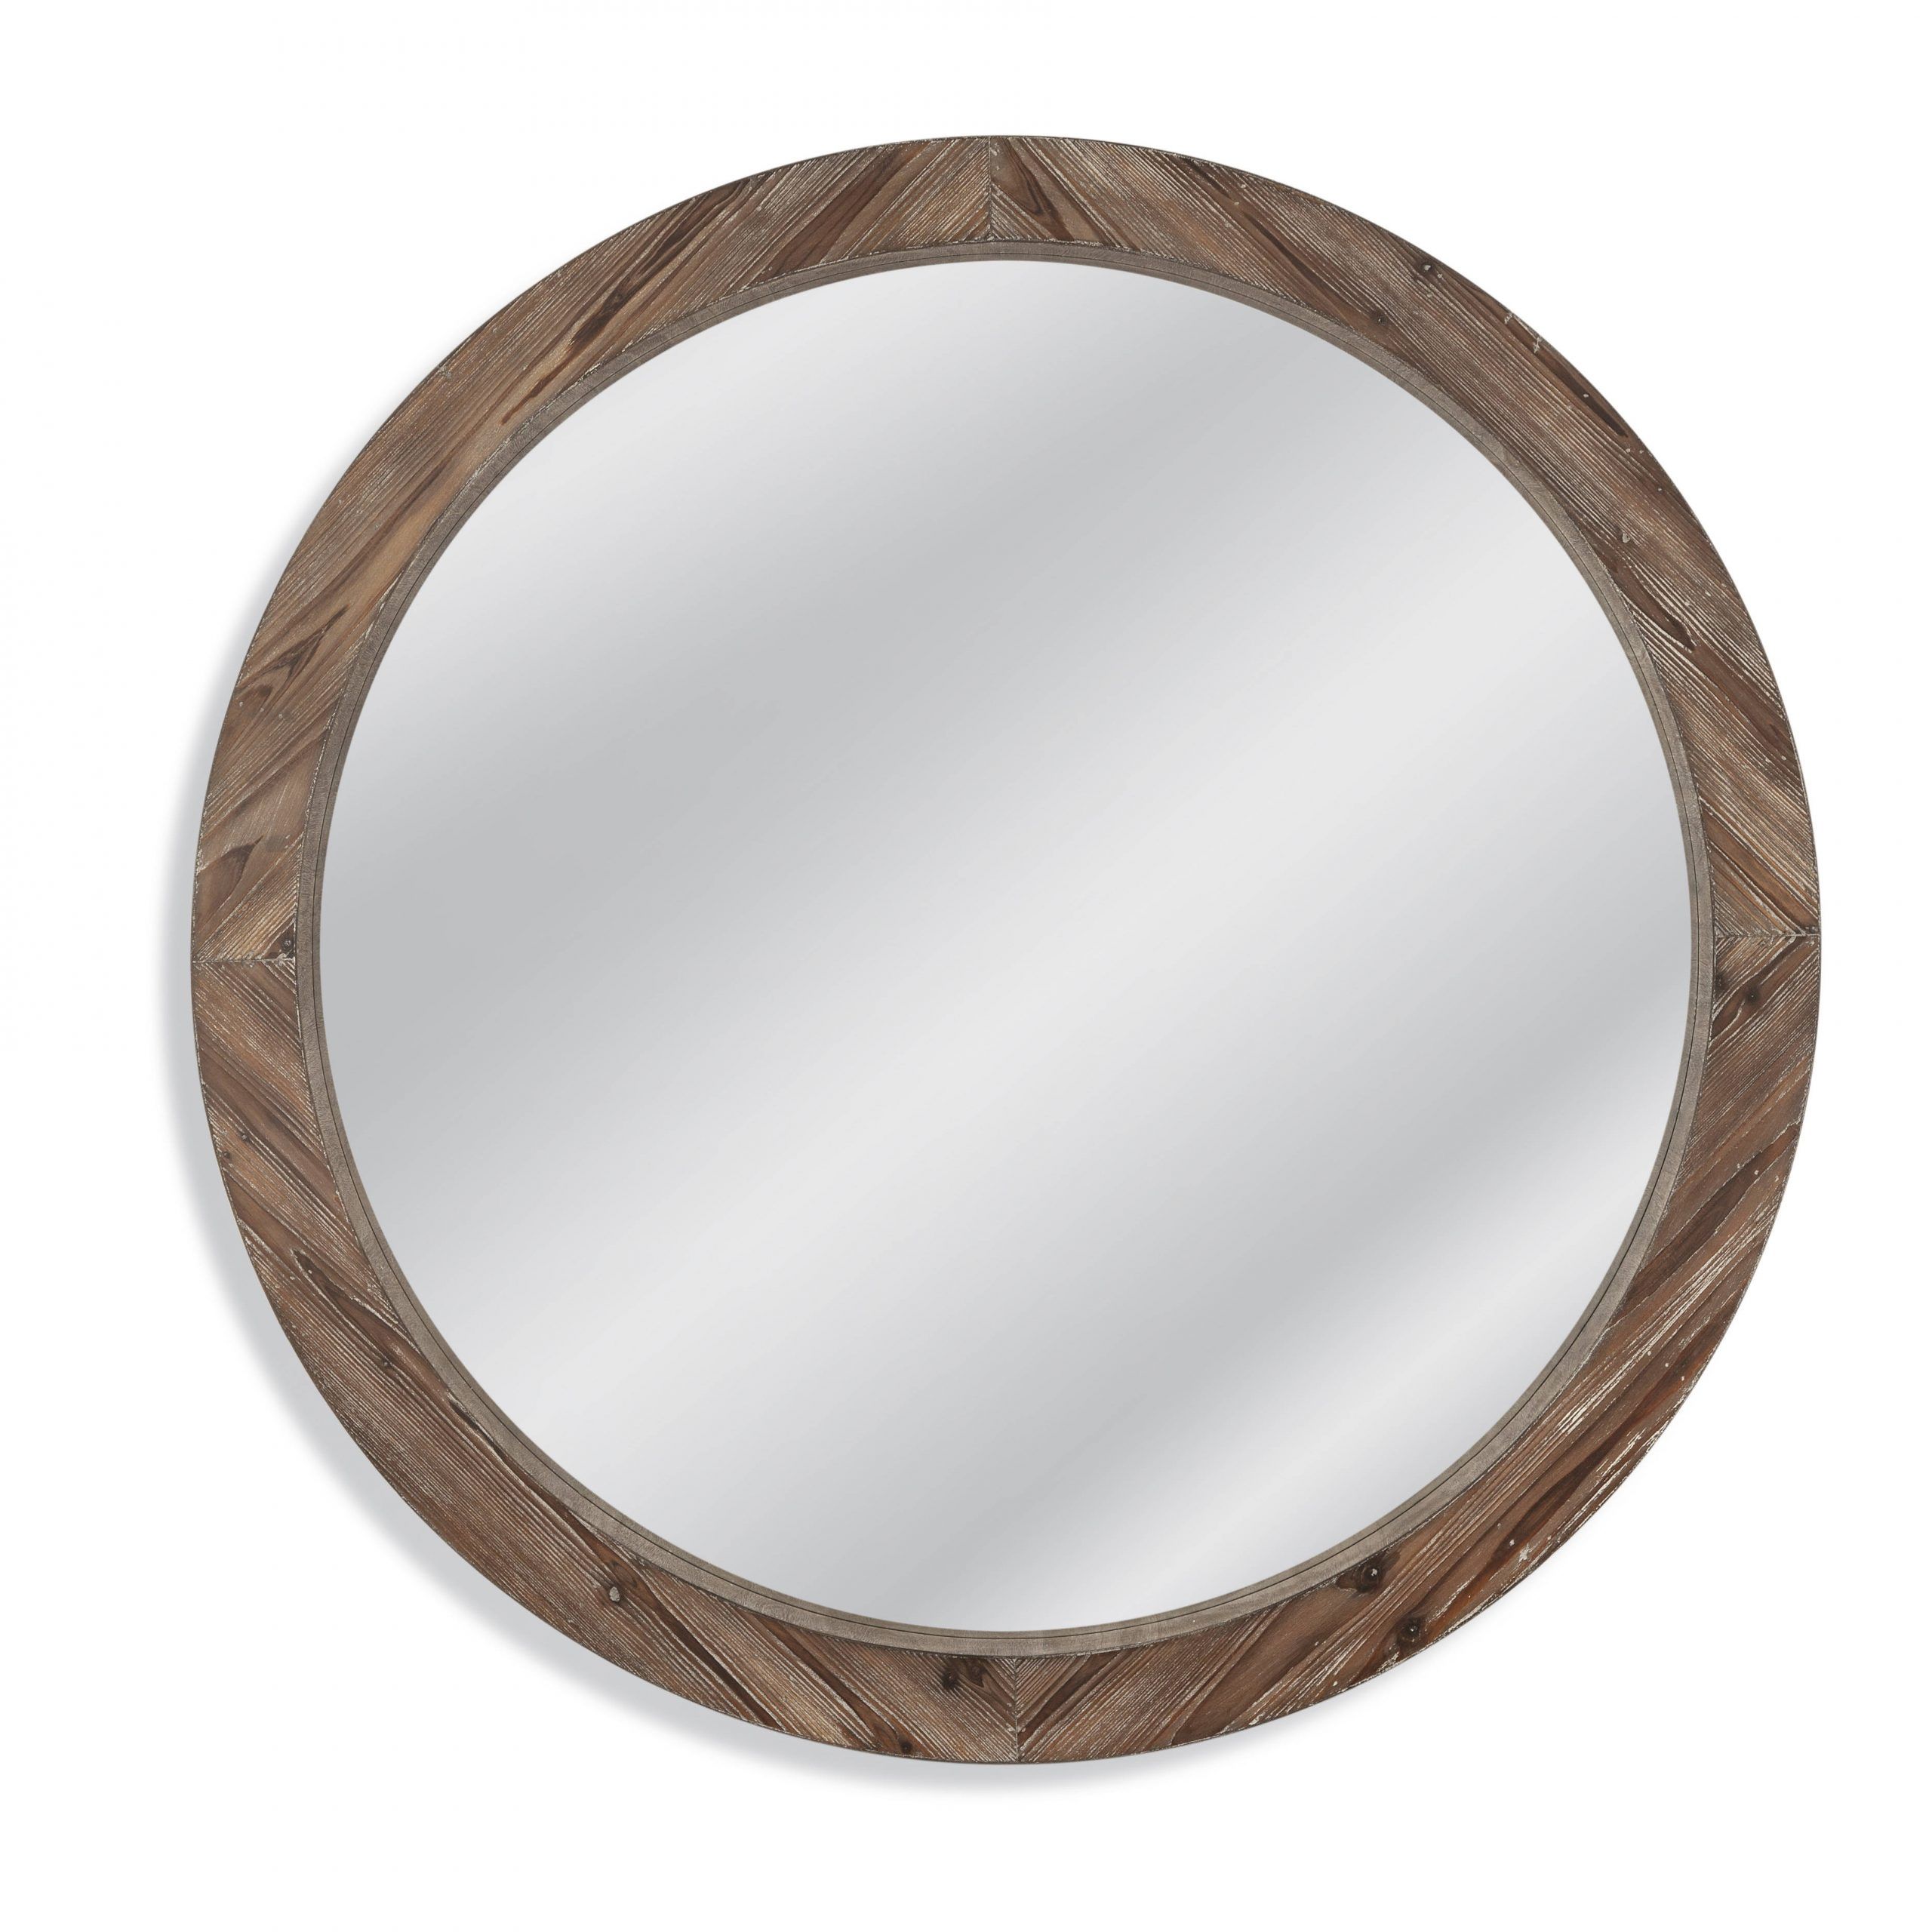 Bassett Mirror Jacques Natural Wood Round Wall Mirror | The Classy Home Pertaining To Organic Natural Wood Round Wall Mirrors (View 14 of 15)